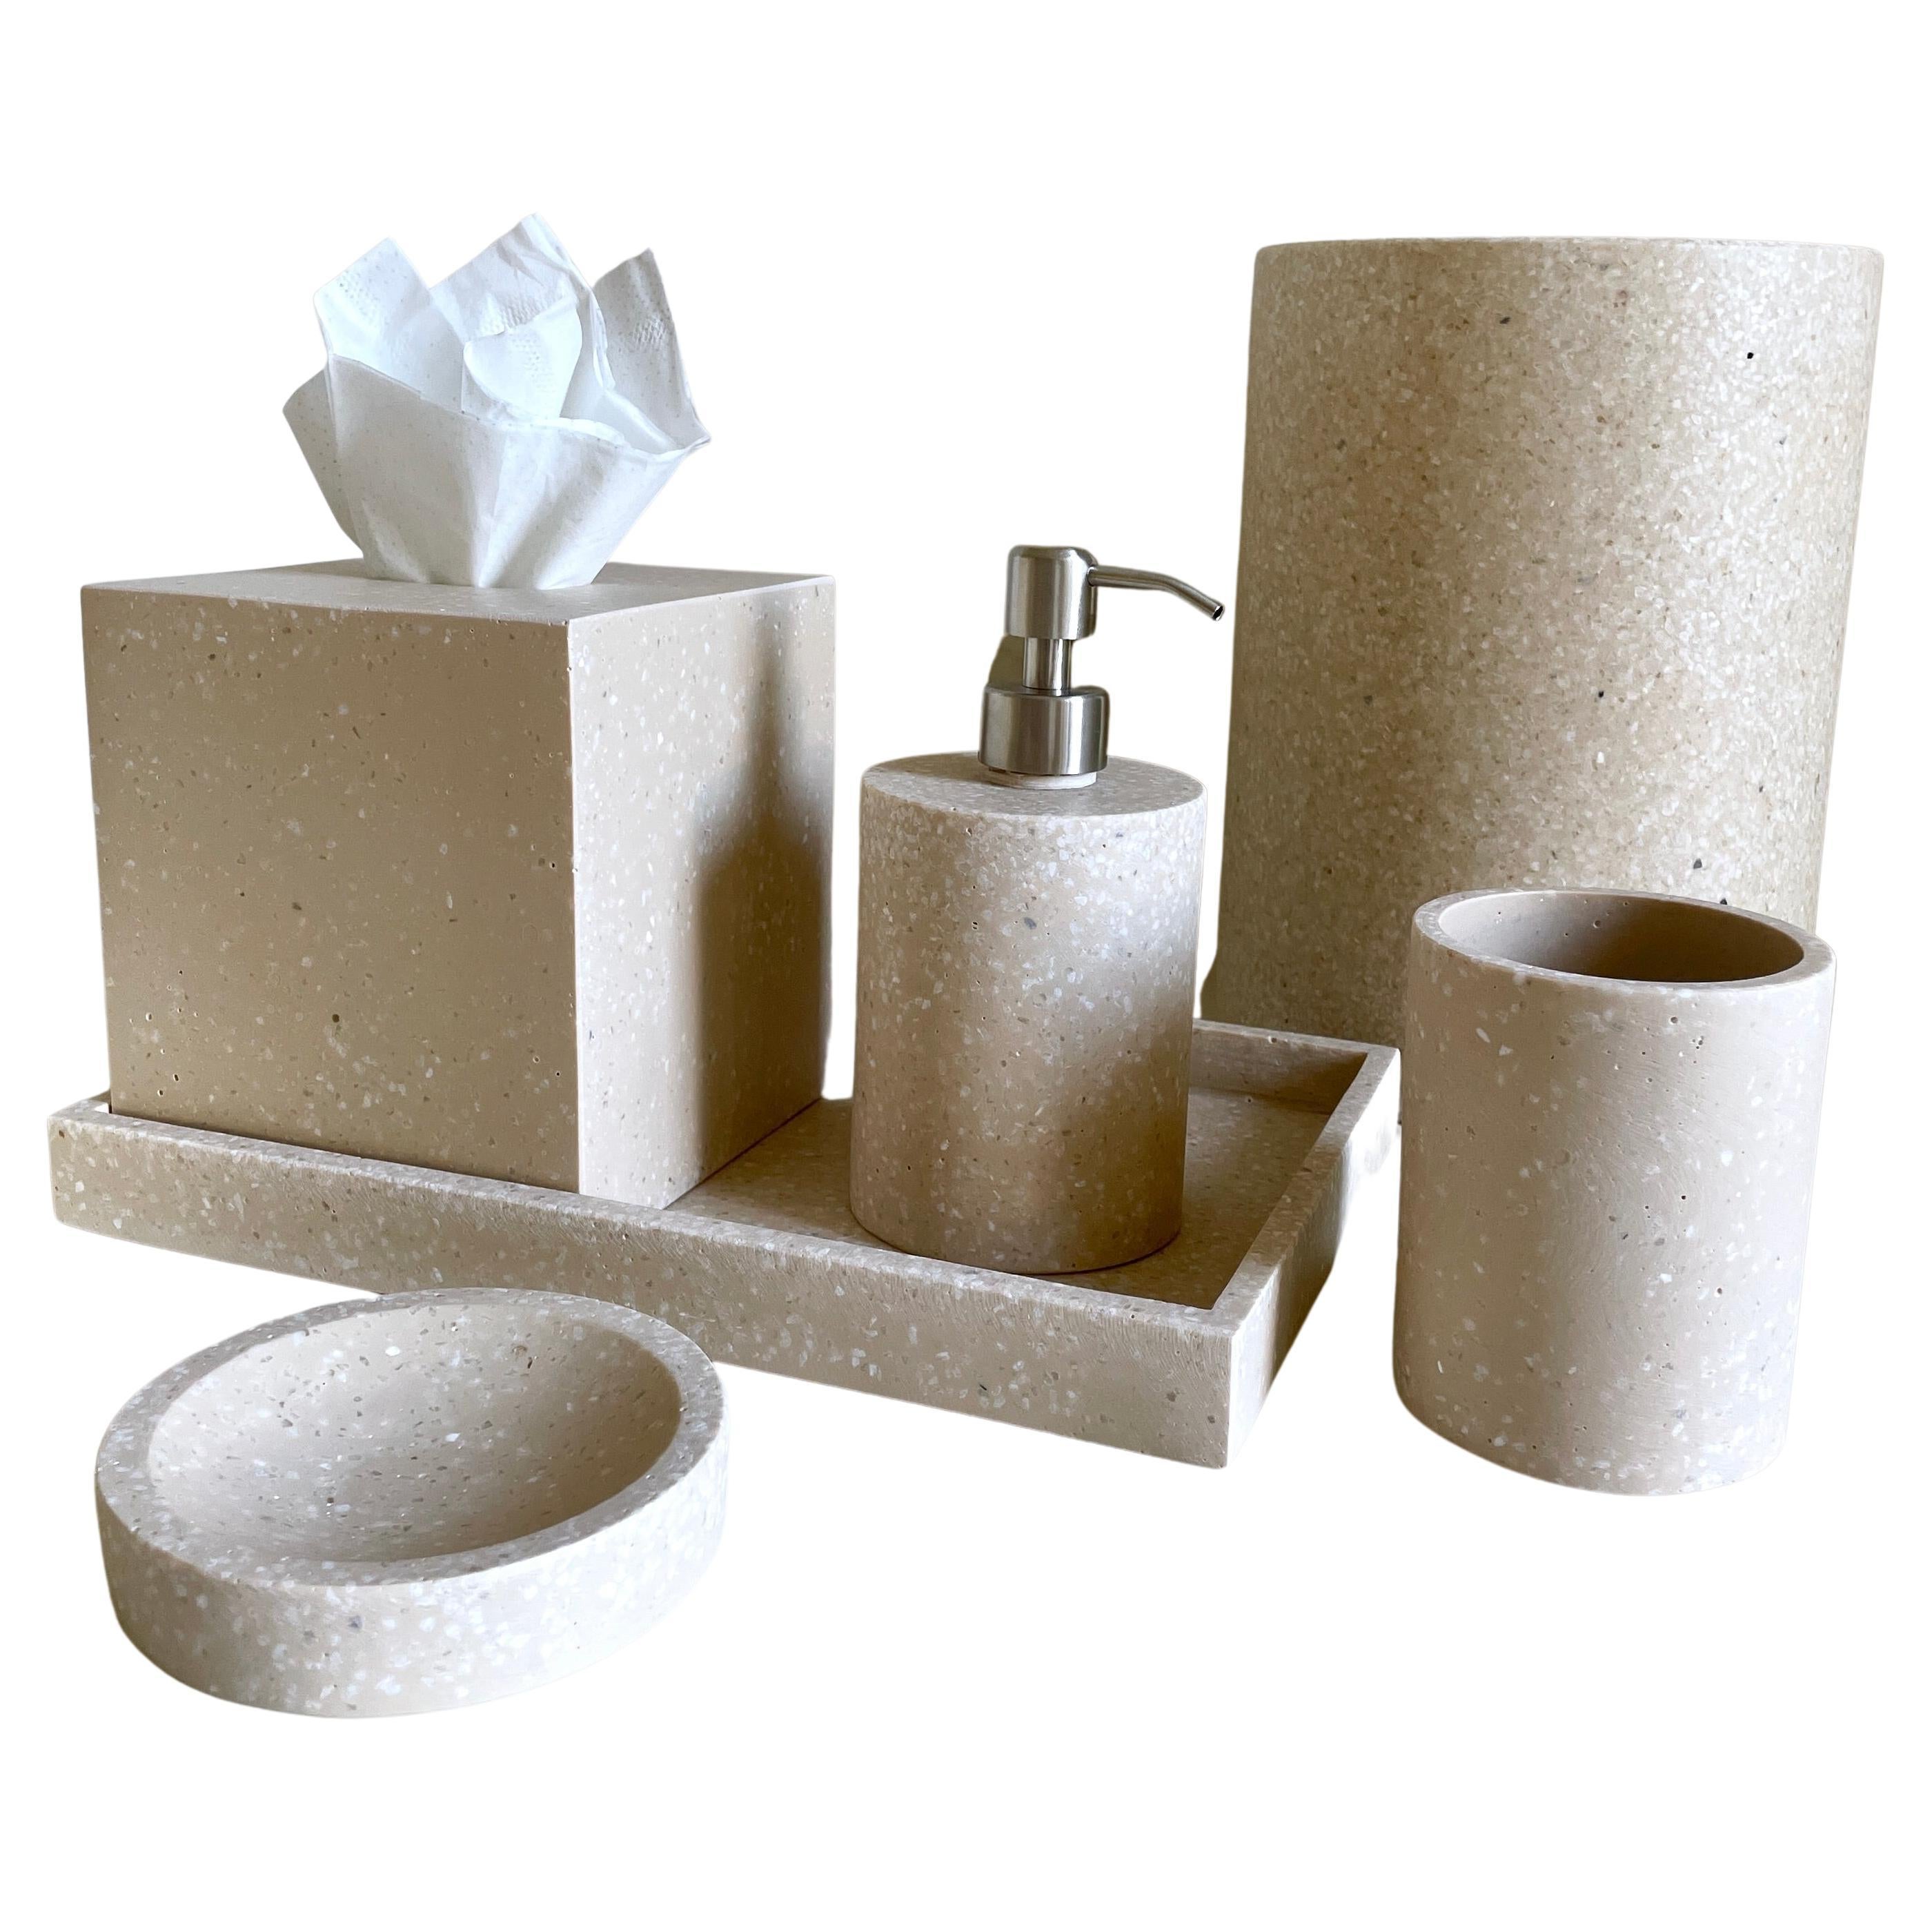  Beige Resin Terrazo Bathroom Set by Paola Valle